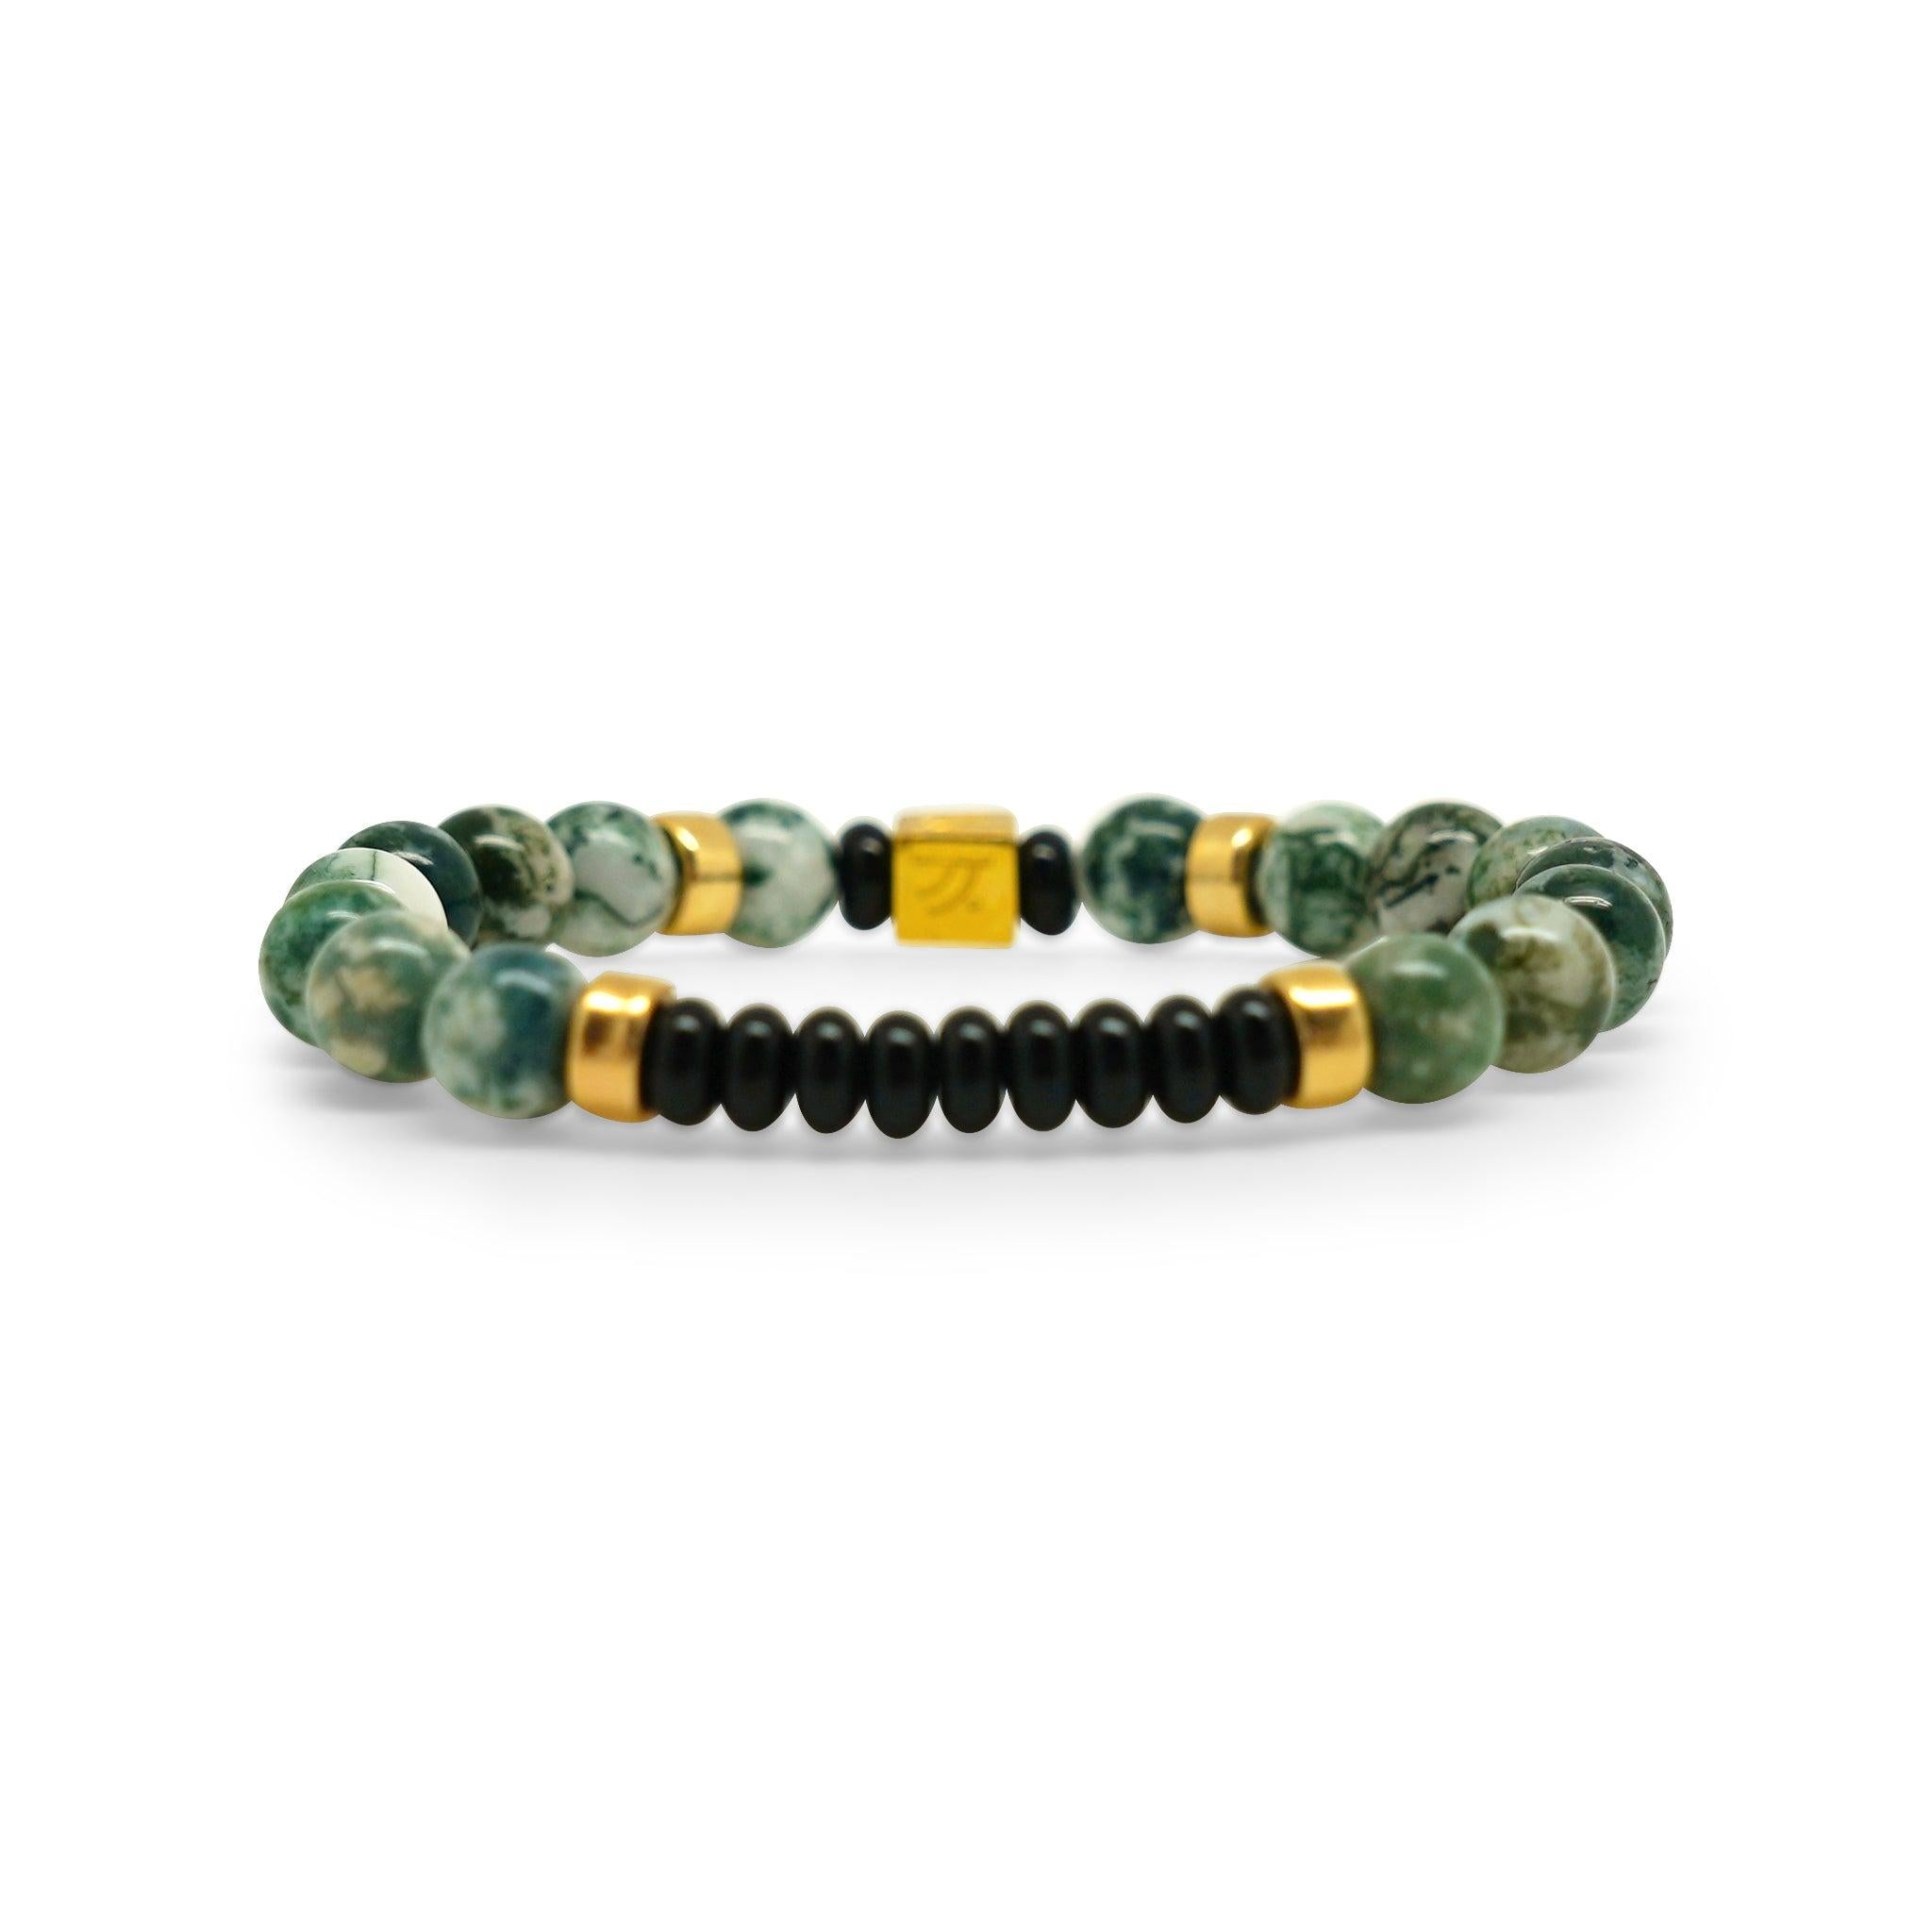 Story Behind The Jewelry
The image of sitting under a tree brings brings a peaceful past time in enjoying the moment and creating a deeper connection with the earth and nature. Tree agate is a wonderful stones connecting the wear to nature creating